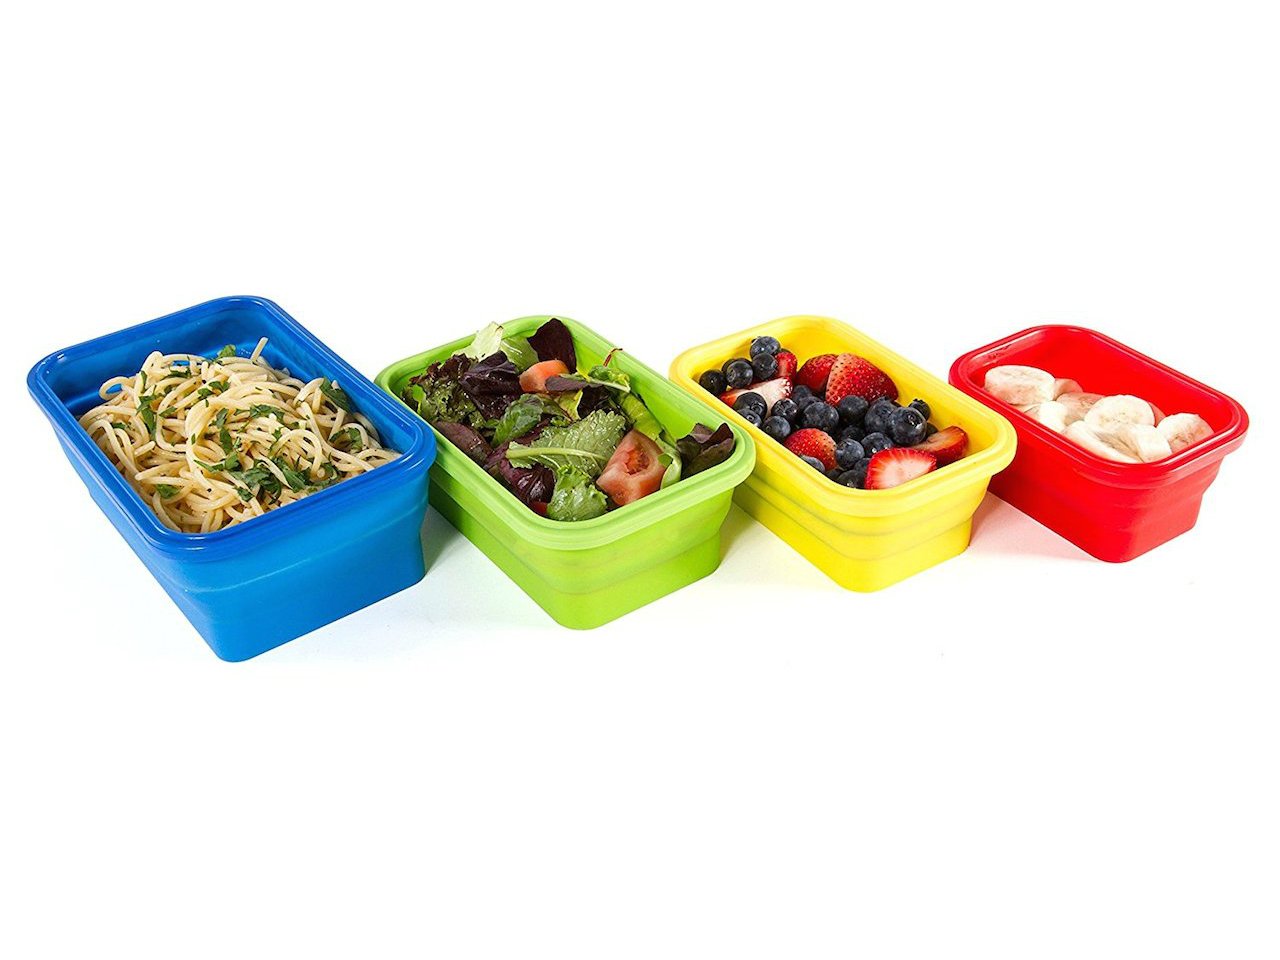 https://chatelaine.com/wp-content/uploads/2017/12/best-tupperware-feature-image-Collapsible-containers-2.jpg